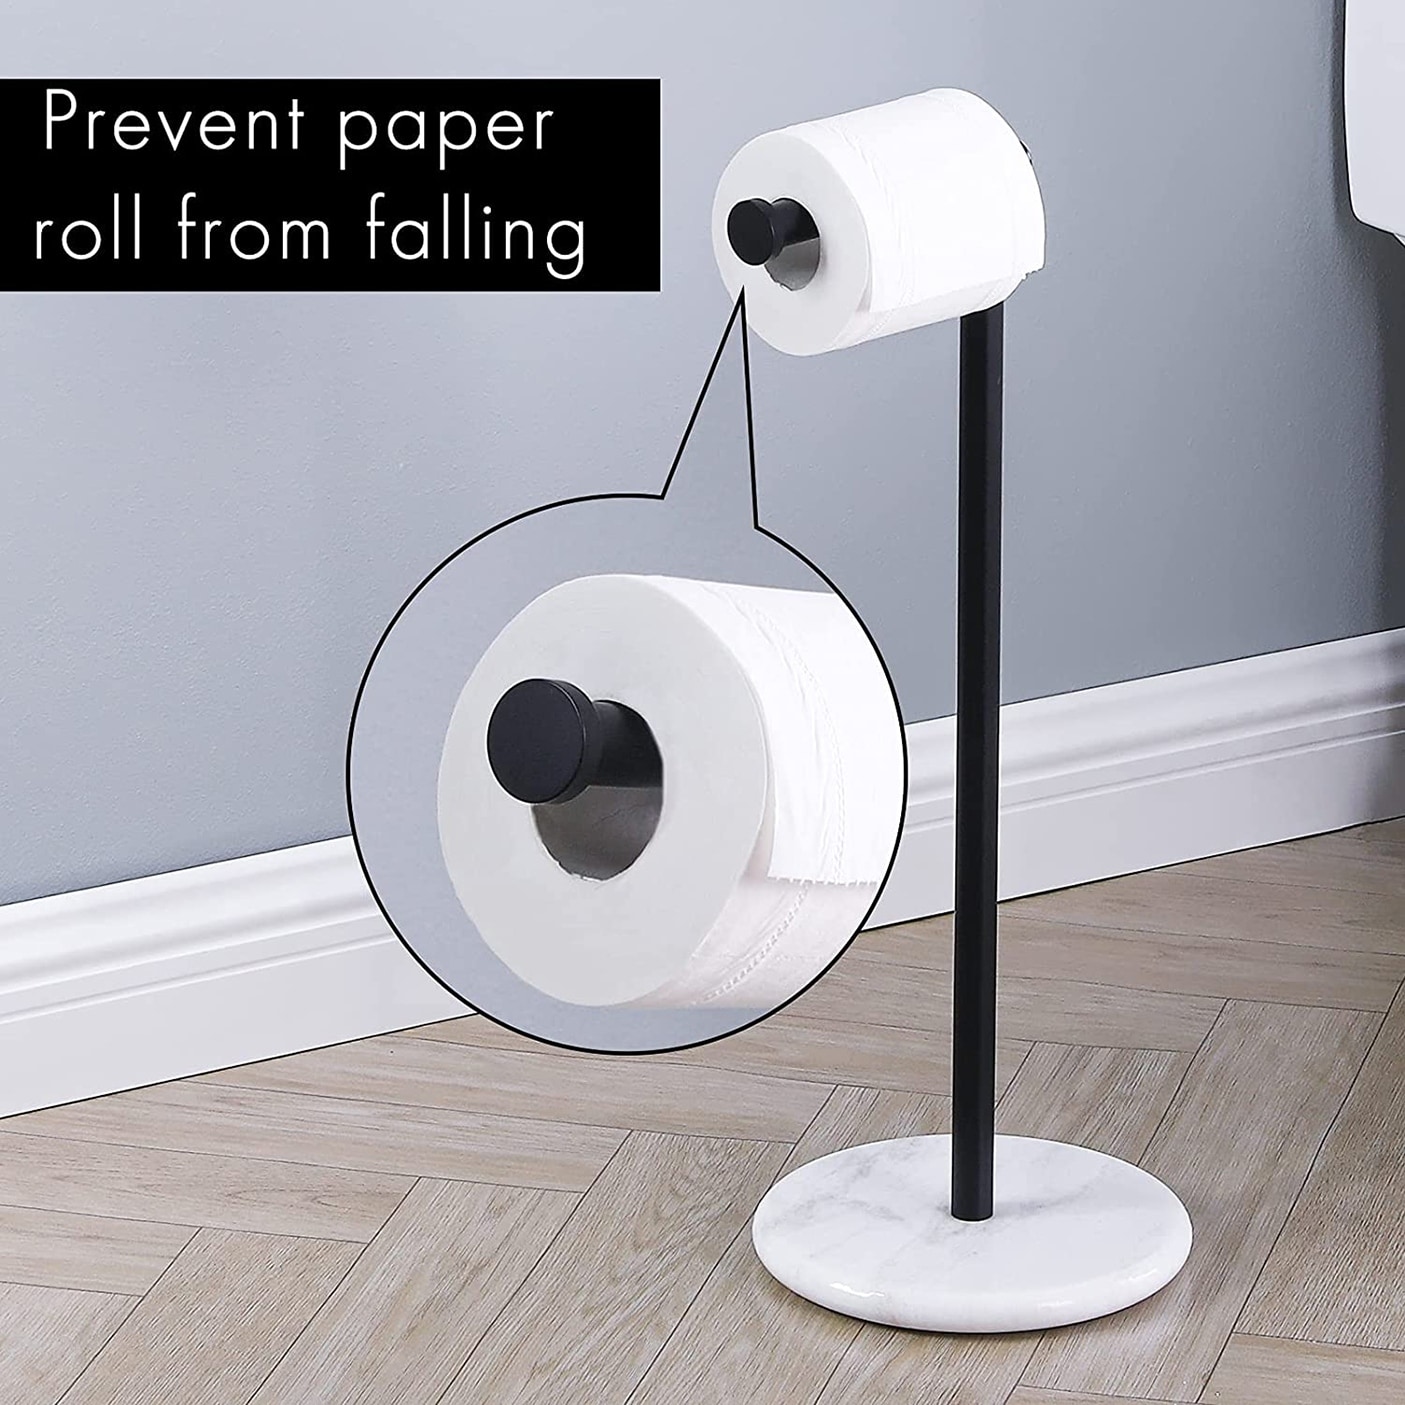 Marble Free Standing Toilet Paper Holder  Free standing toilet paper holder,  Toilet paper holder, Toilet paper